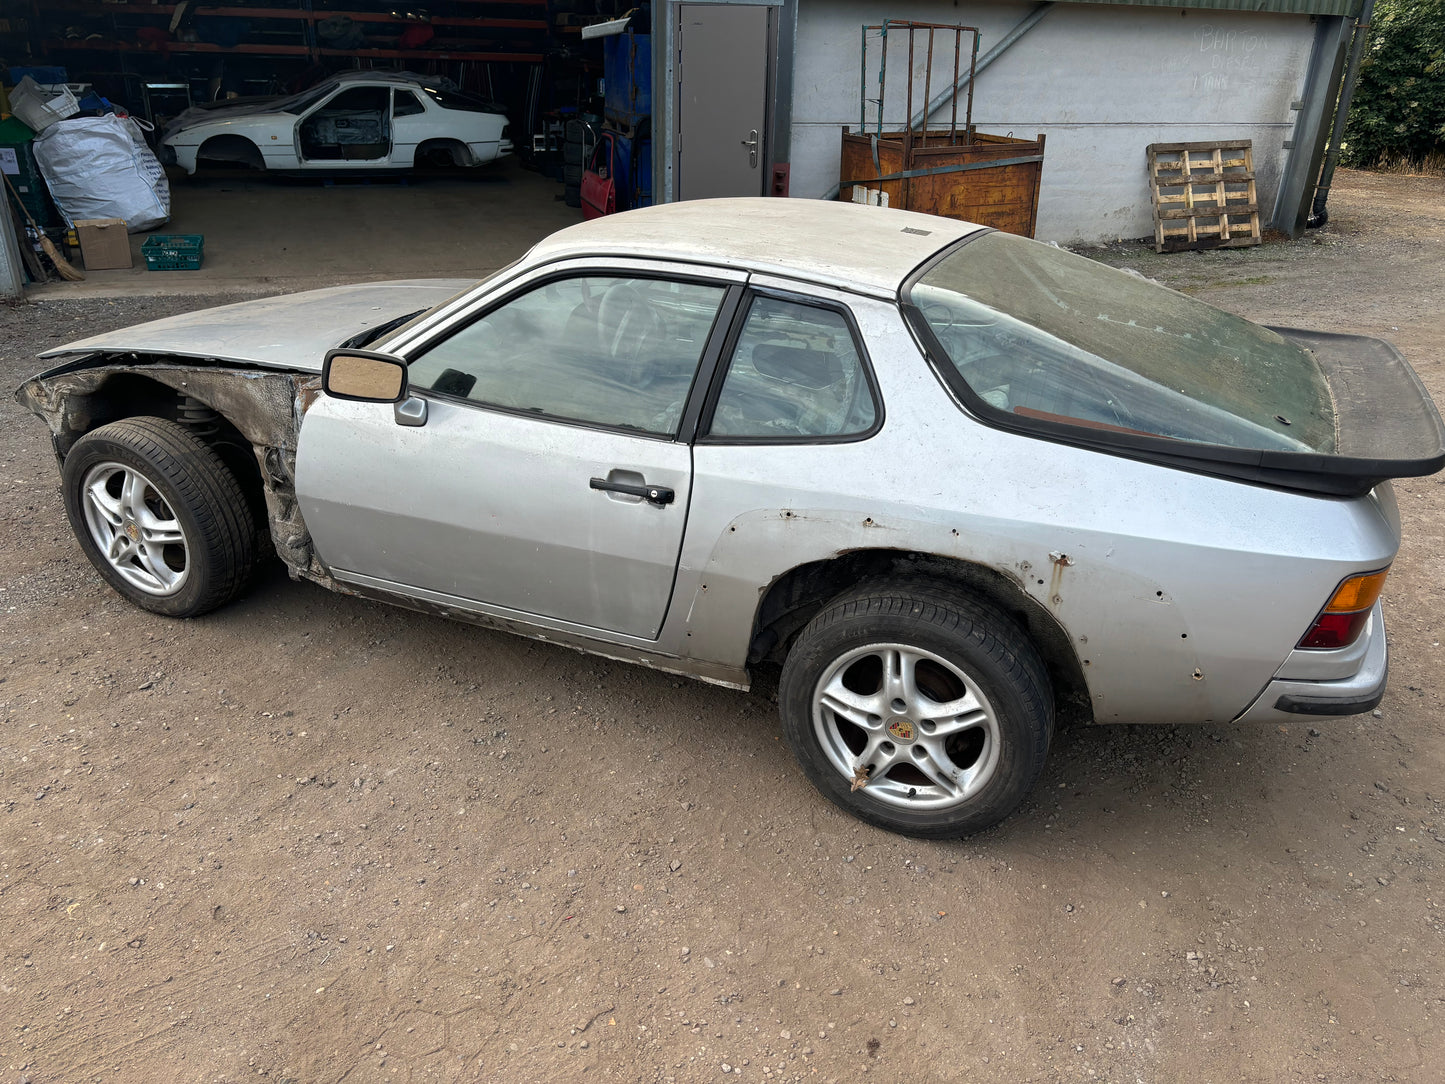 Porsche 924 Turbo project, non runner, comes with repair panels